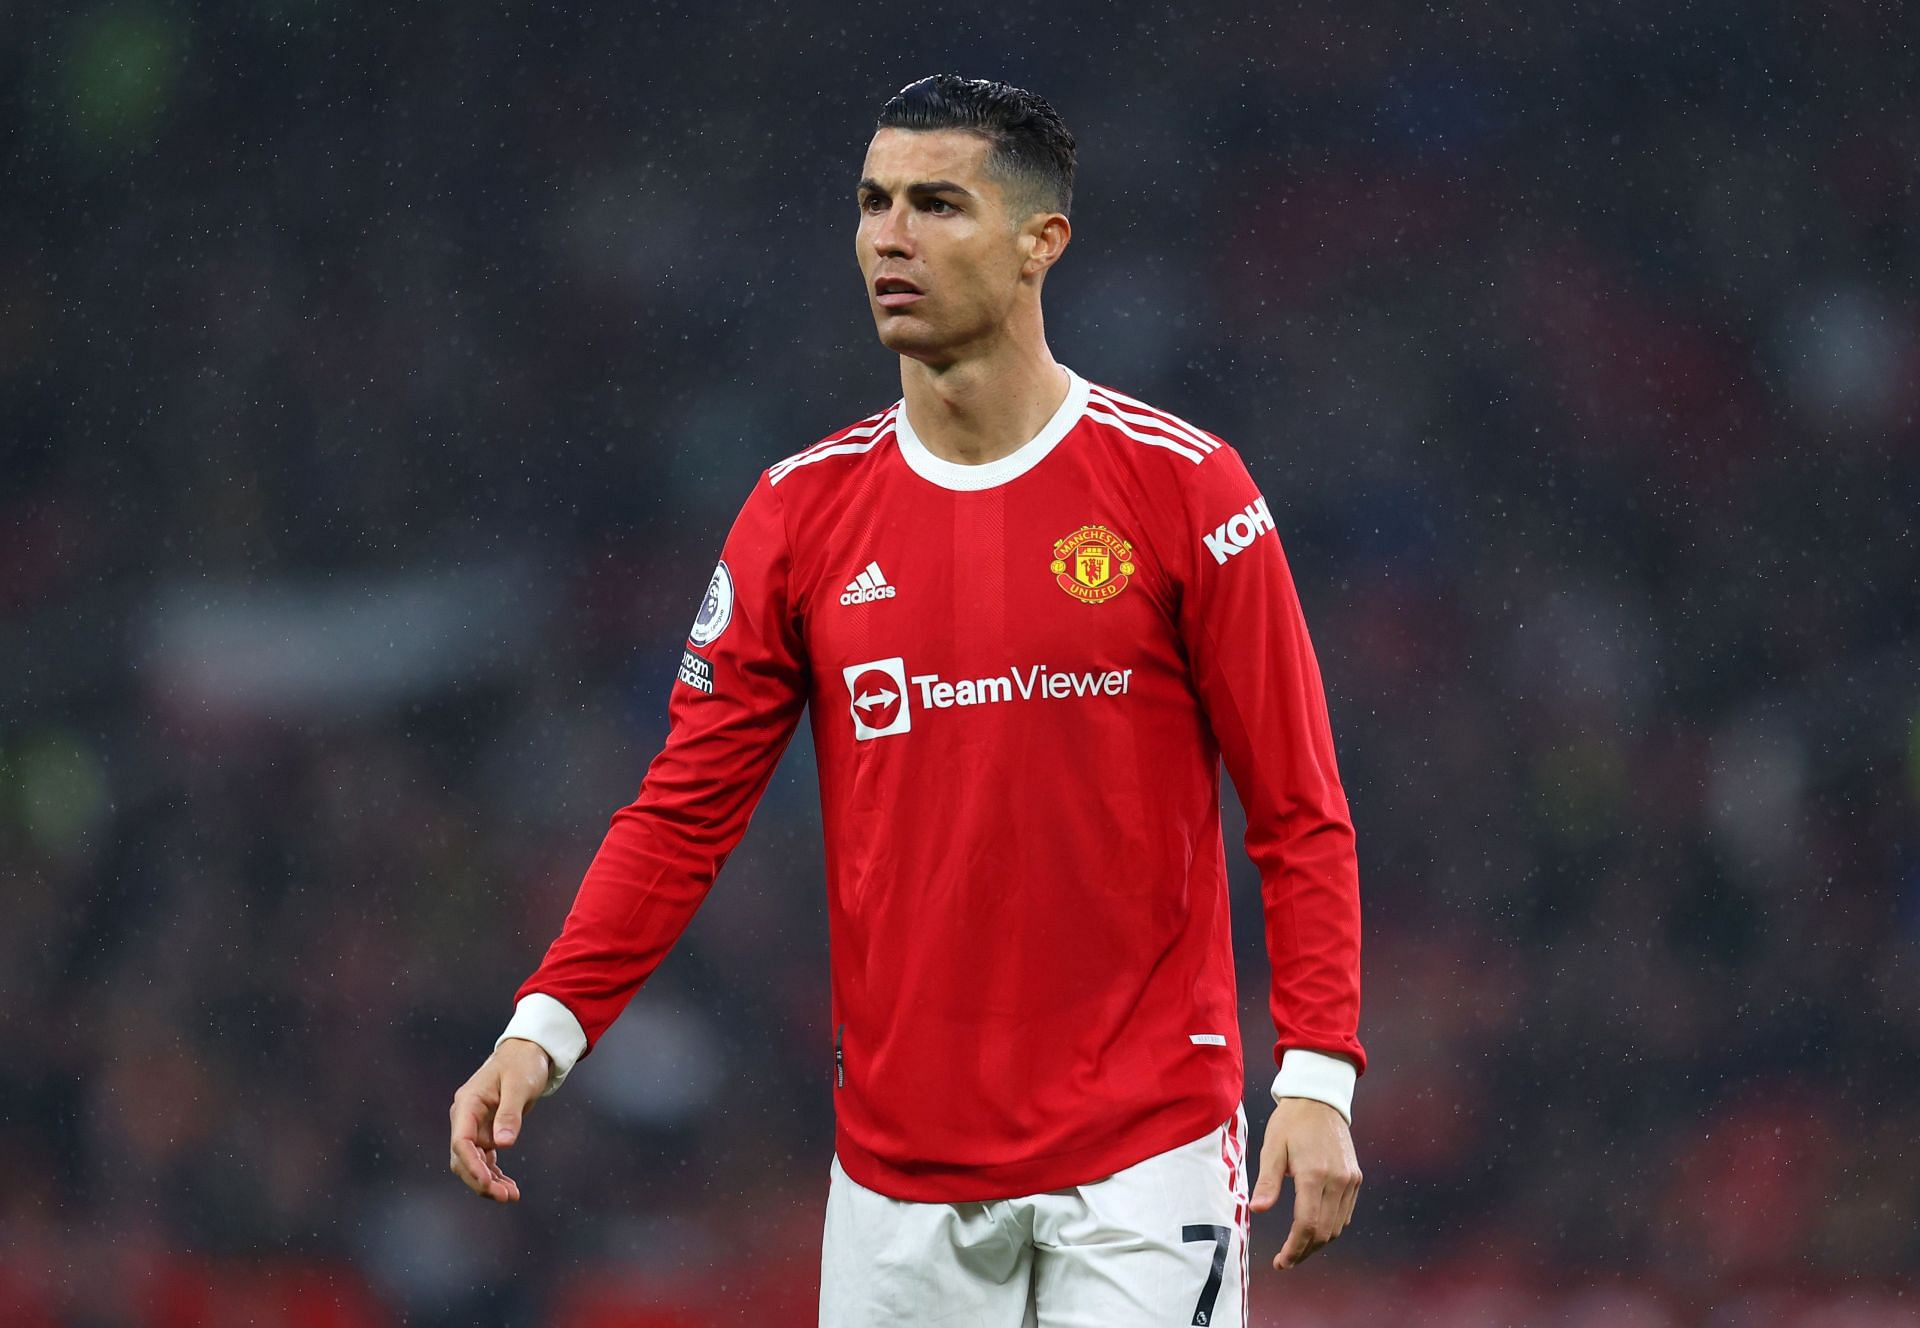 Cristiano Ronaldo in action for Manchester United against Brentford